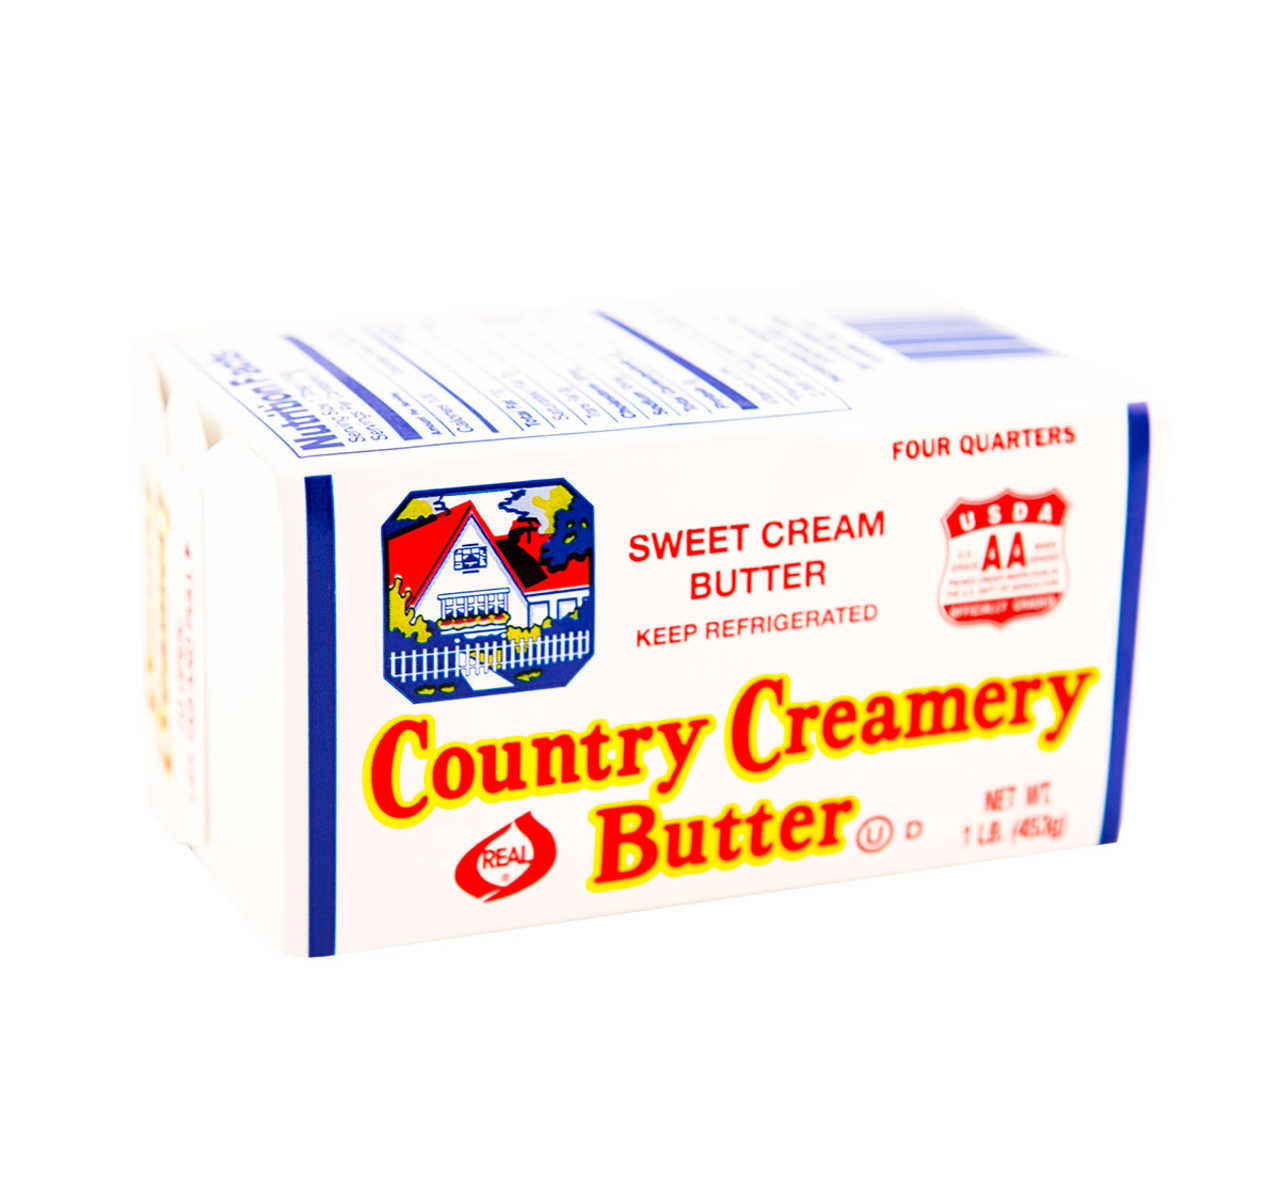 1 Pound of Sweet Cream Westby Creamery Butter